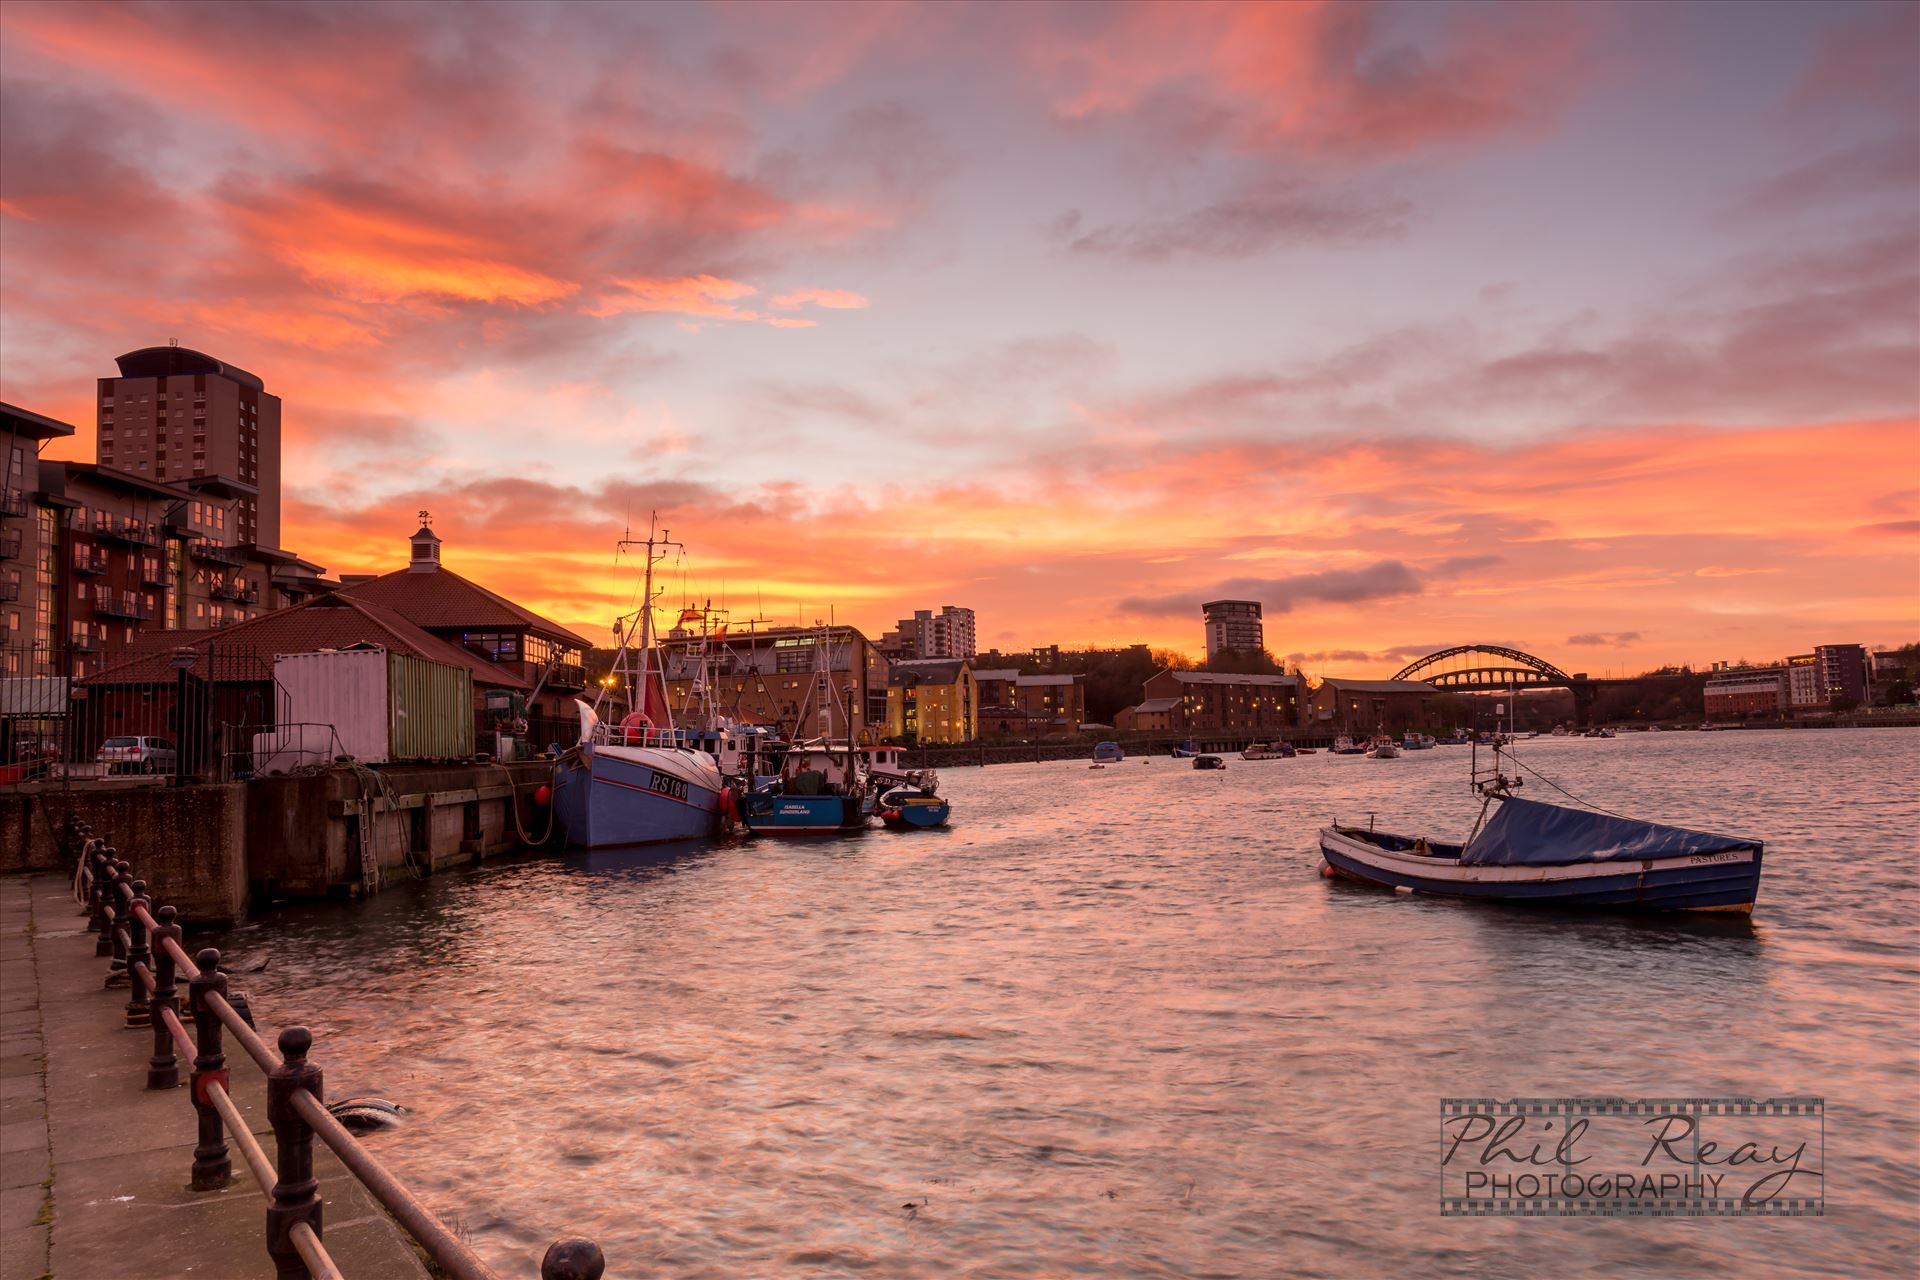 Sun sets over Sunderland A fabulous sunset at Sunderland Fish Quay by philreay